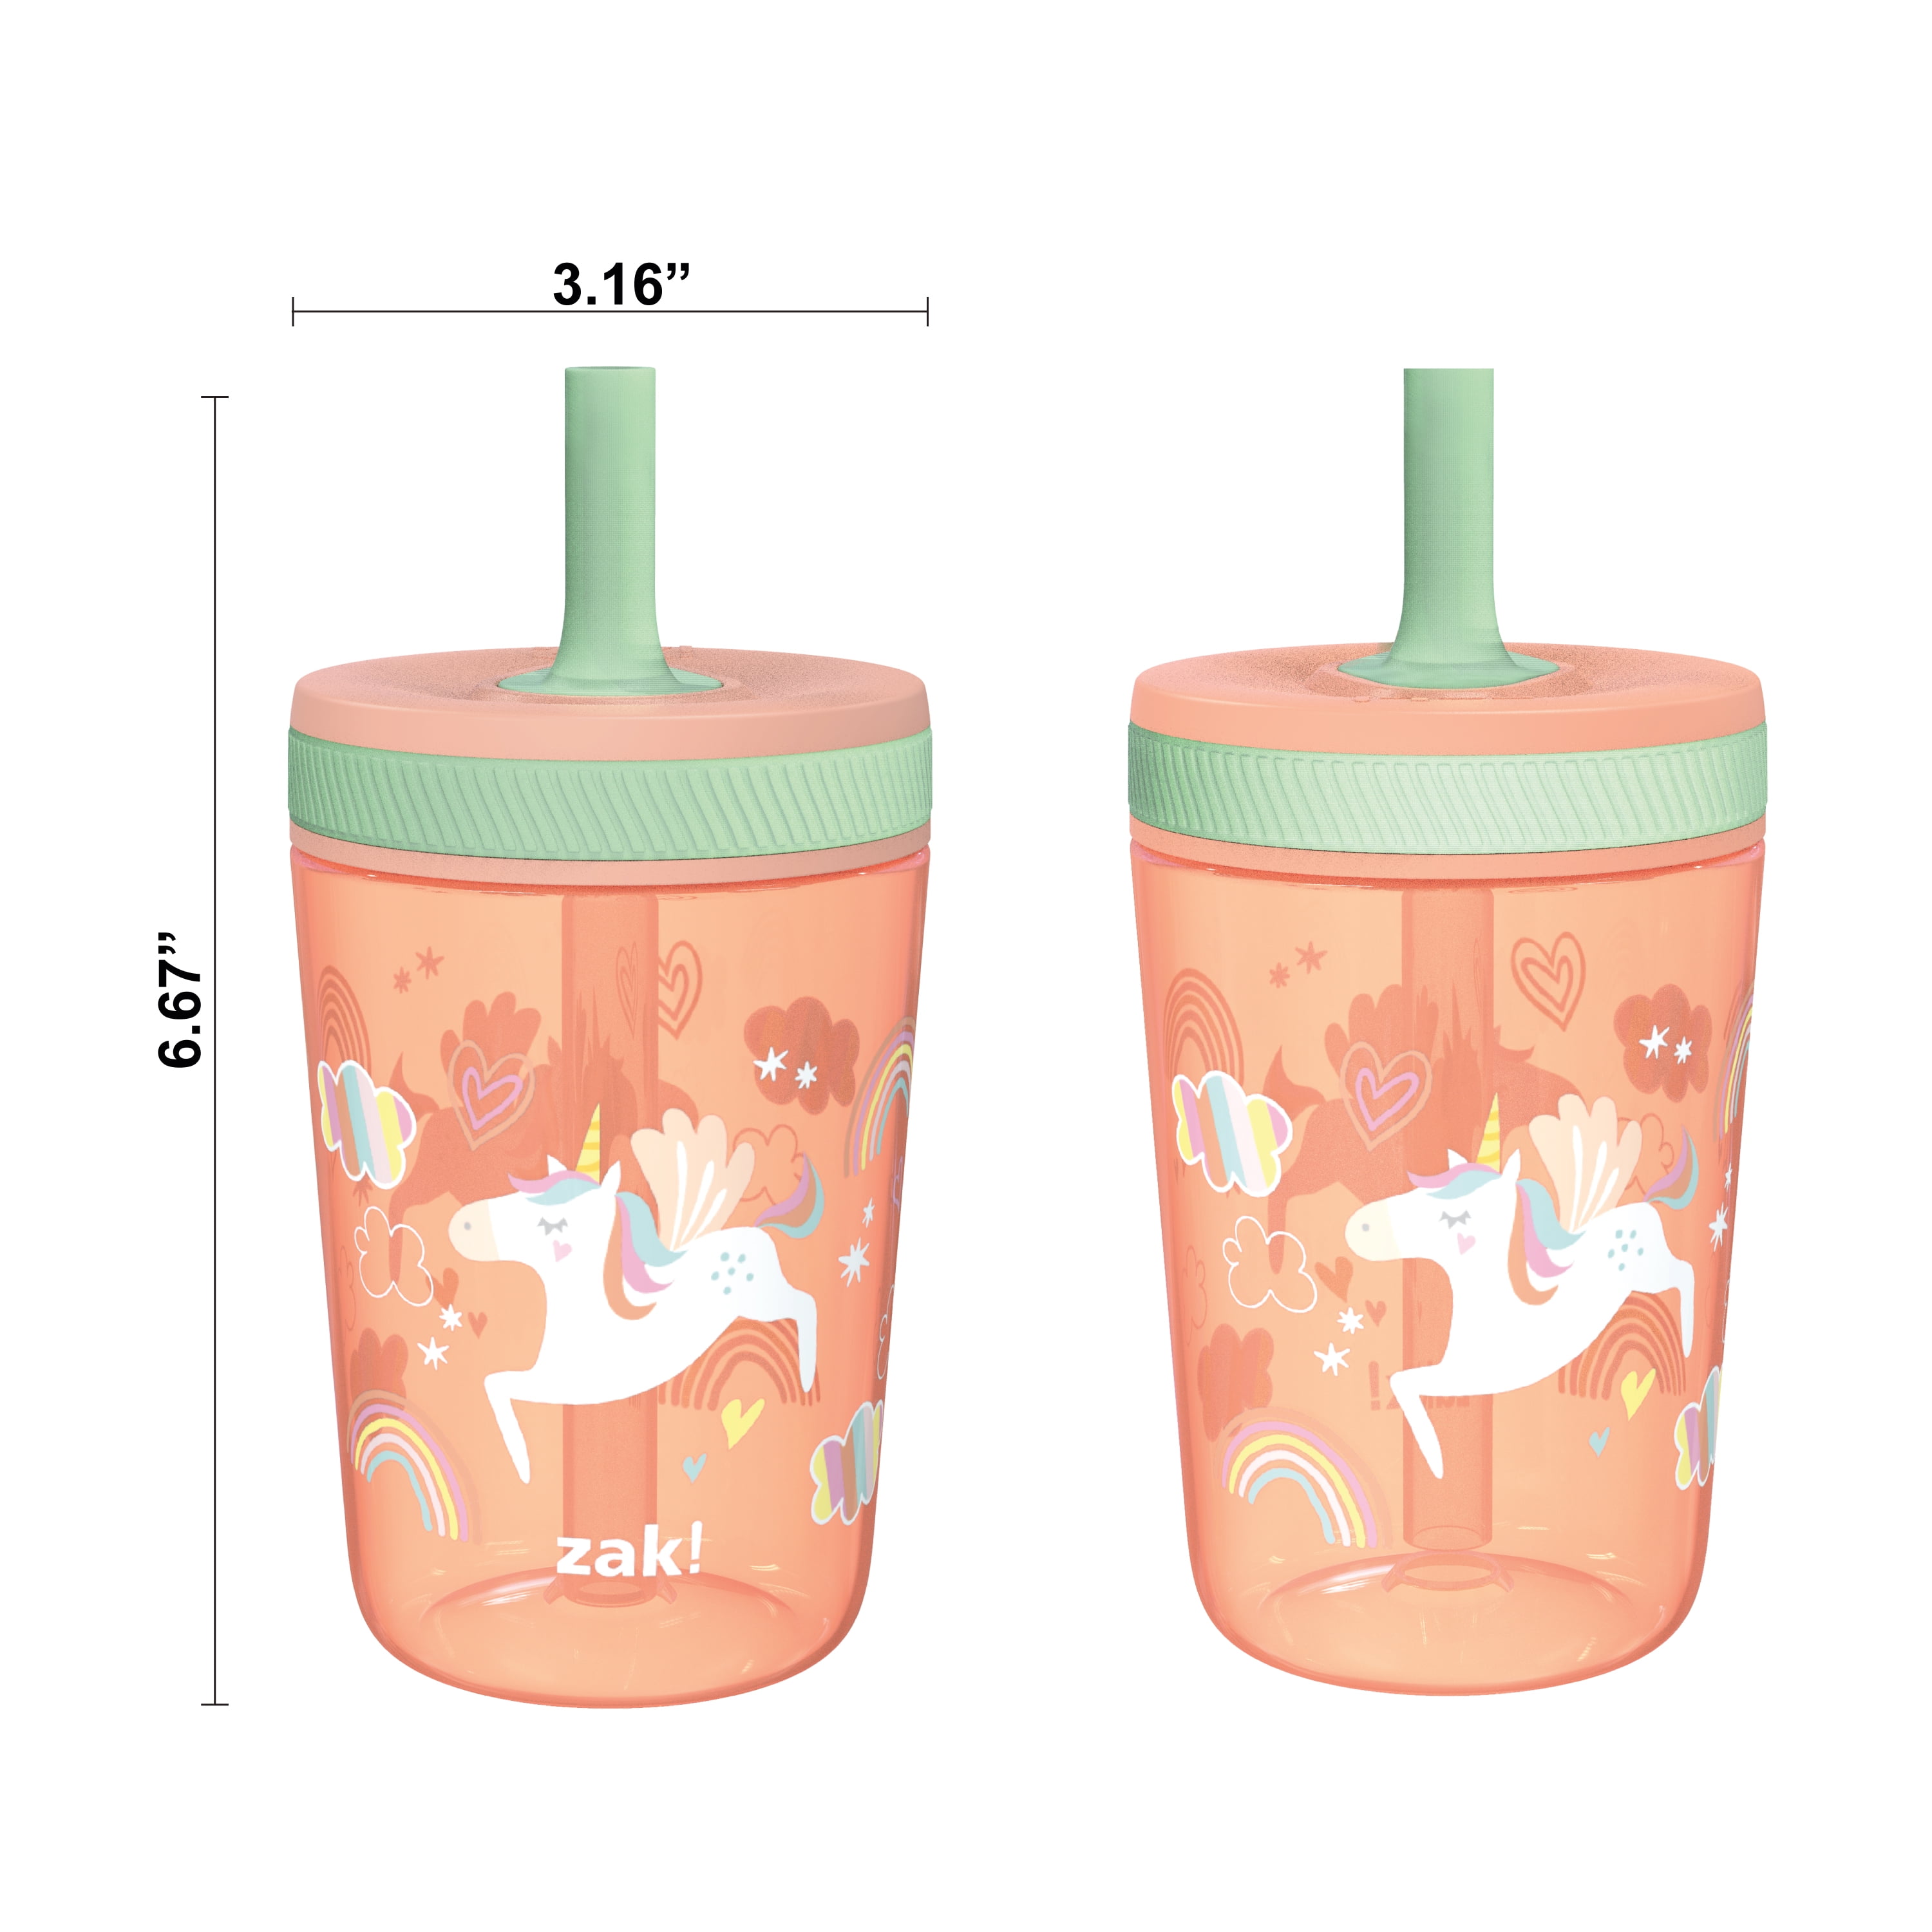 Zak Designs: Toddlerific Sippy, Has your toddler's sippy cup ever leaked?  What messes have ensued? See for yourself why our adjustable flow, no spill  Perfect Flo sippy cup is a terrific